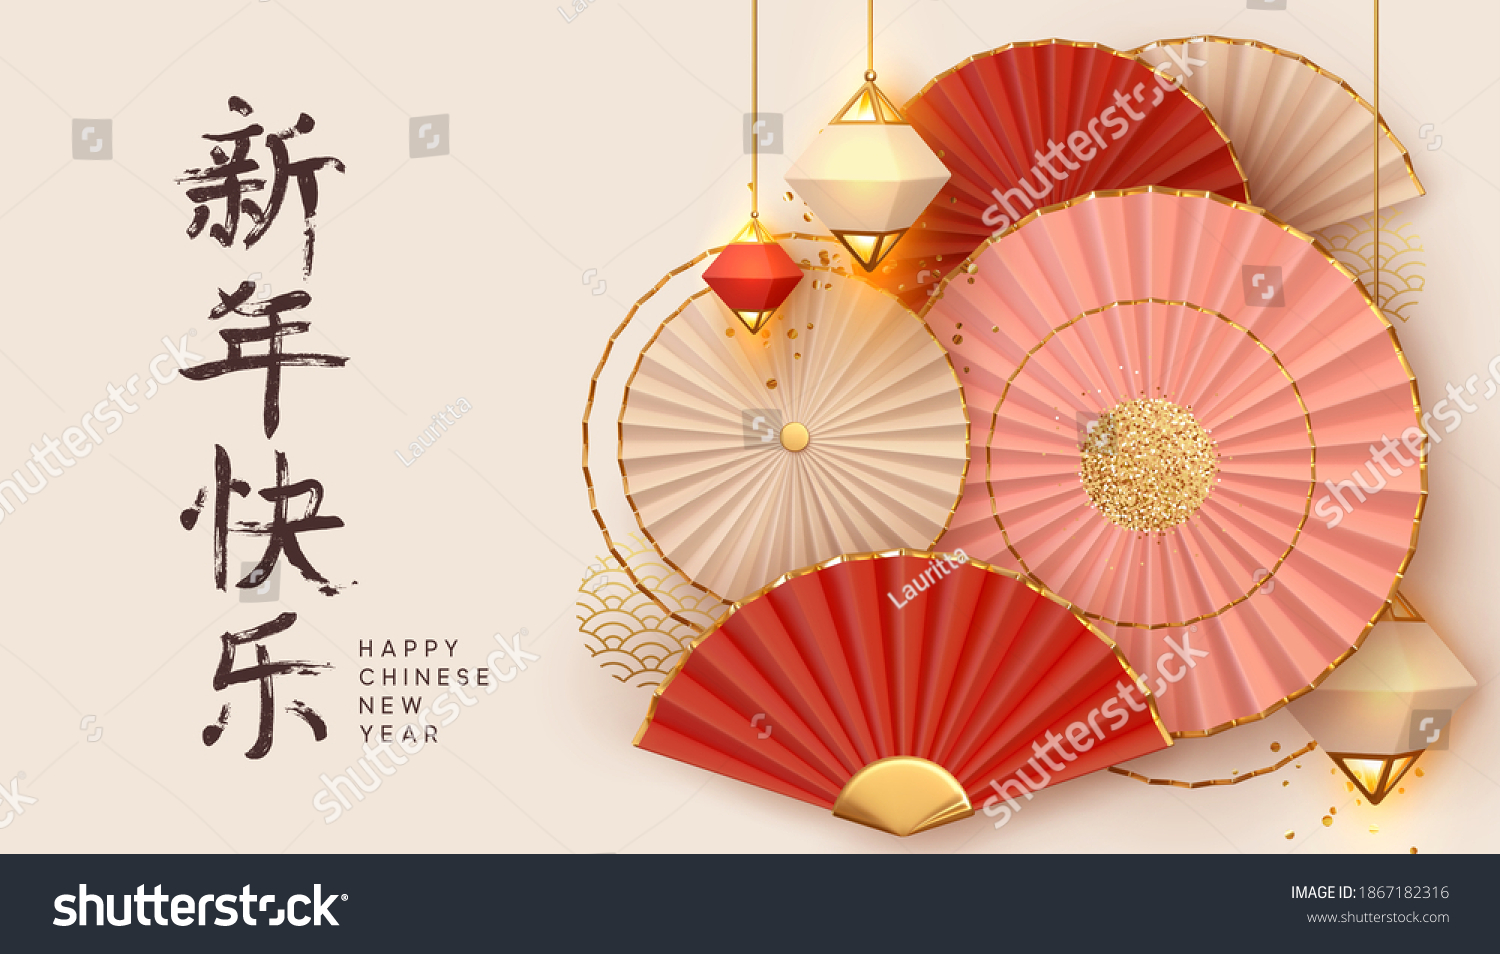 Happy Chinese New Year. Hanging shine lantern, Oriental Asian style paper fans. Traditional Holiday Lunar New Year. Beige background realistic fan flowers craft party decoration. Gold glitter confetti #1867182316